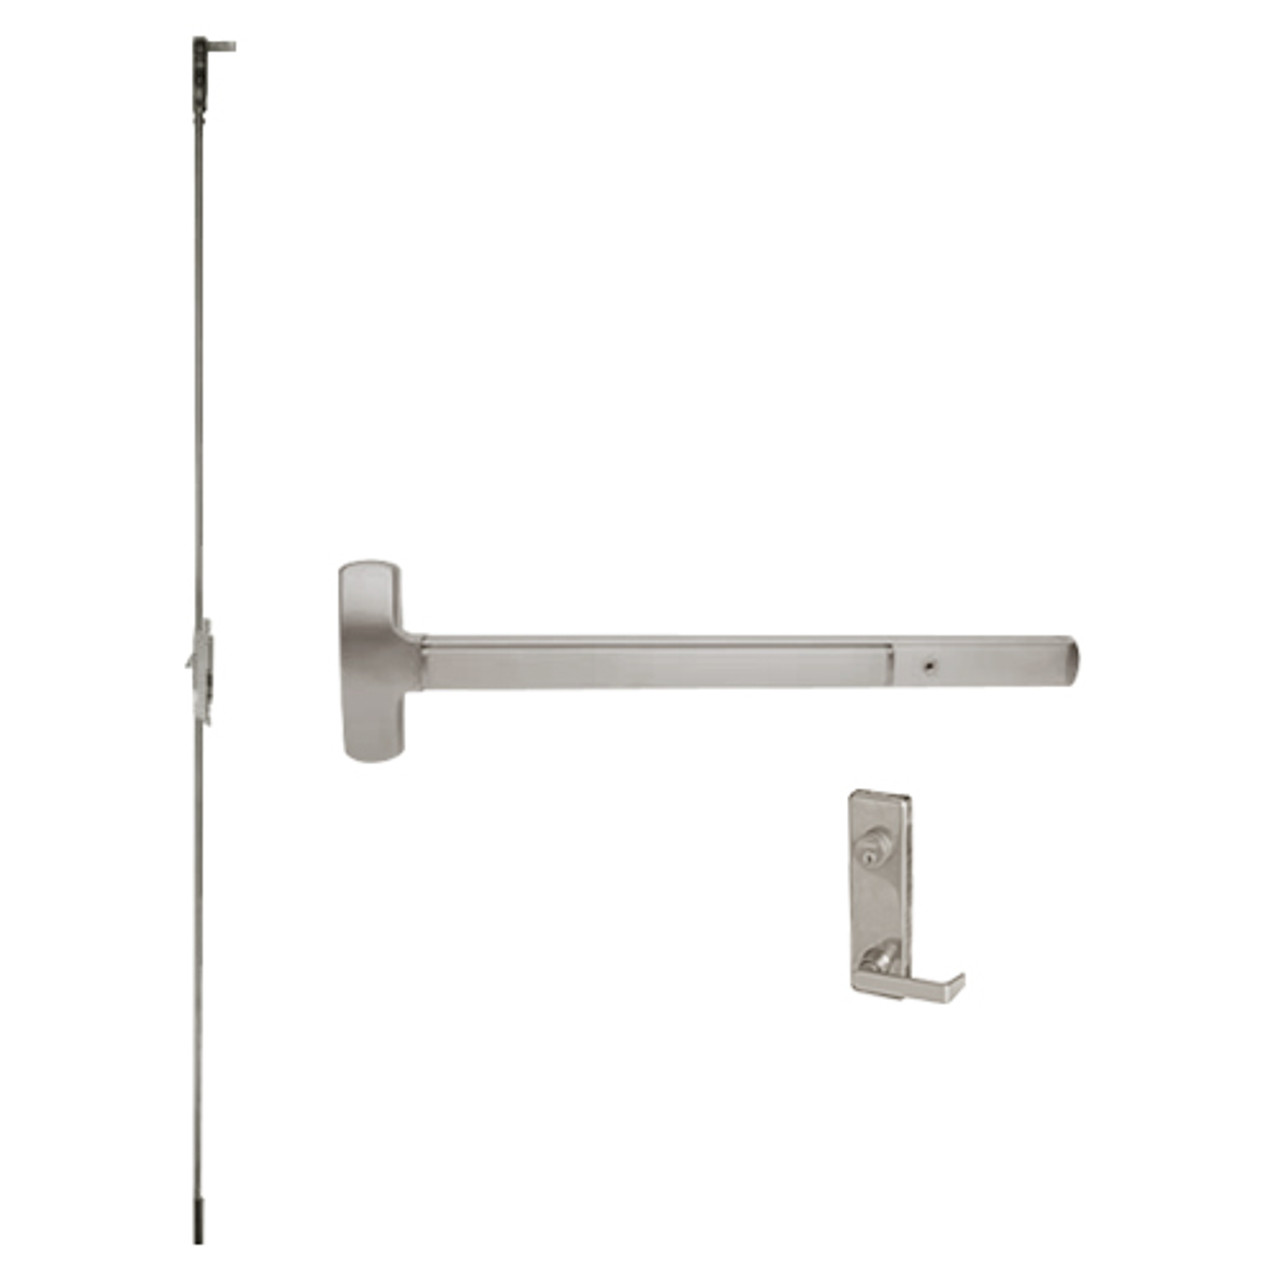 25-C-L-DANE-US32D-3-LHR Falcon Exit Device in Satin Stainless Steel